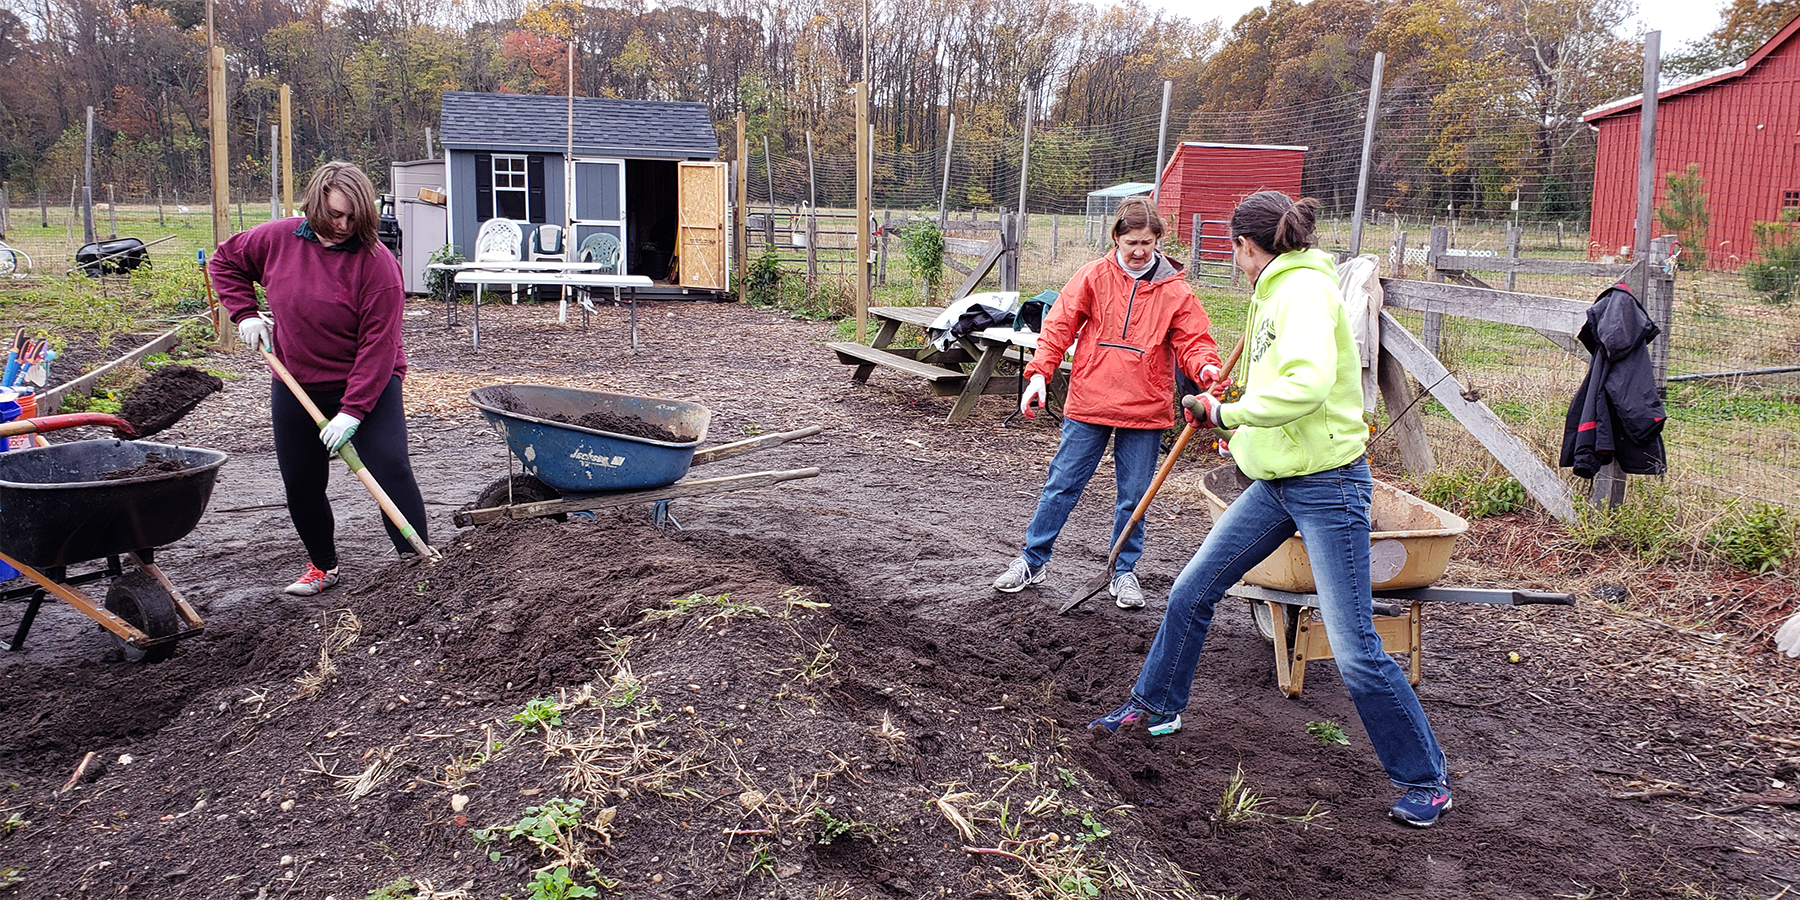  Volunteers from Selwyn Avenue Presbyterian Church work a compost pile to strengthen the garden. Photo provided by Selwyn Avenue Presbyterian Church.